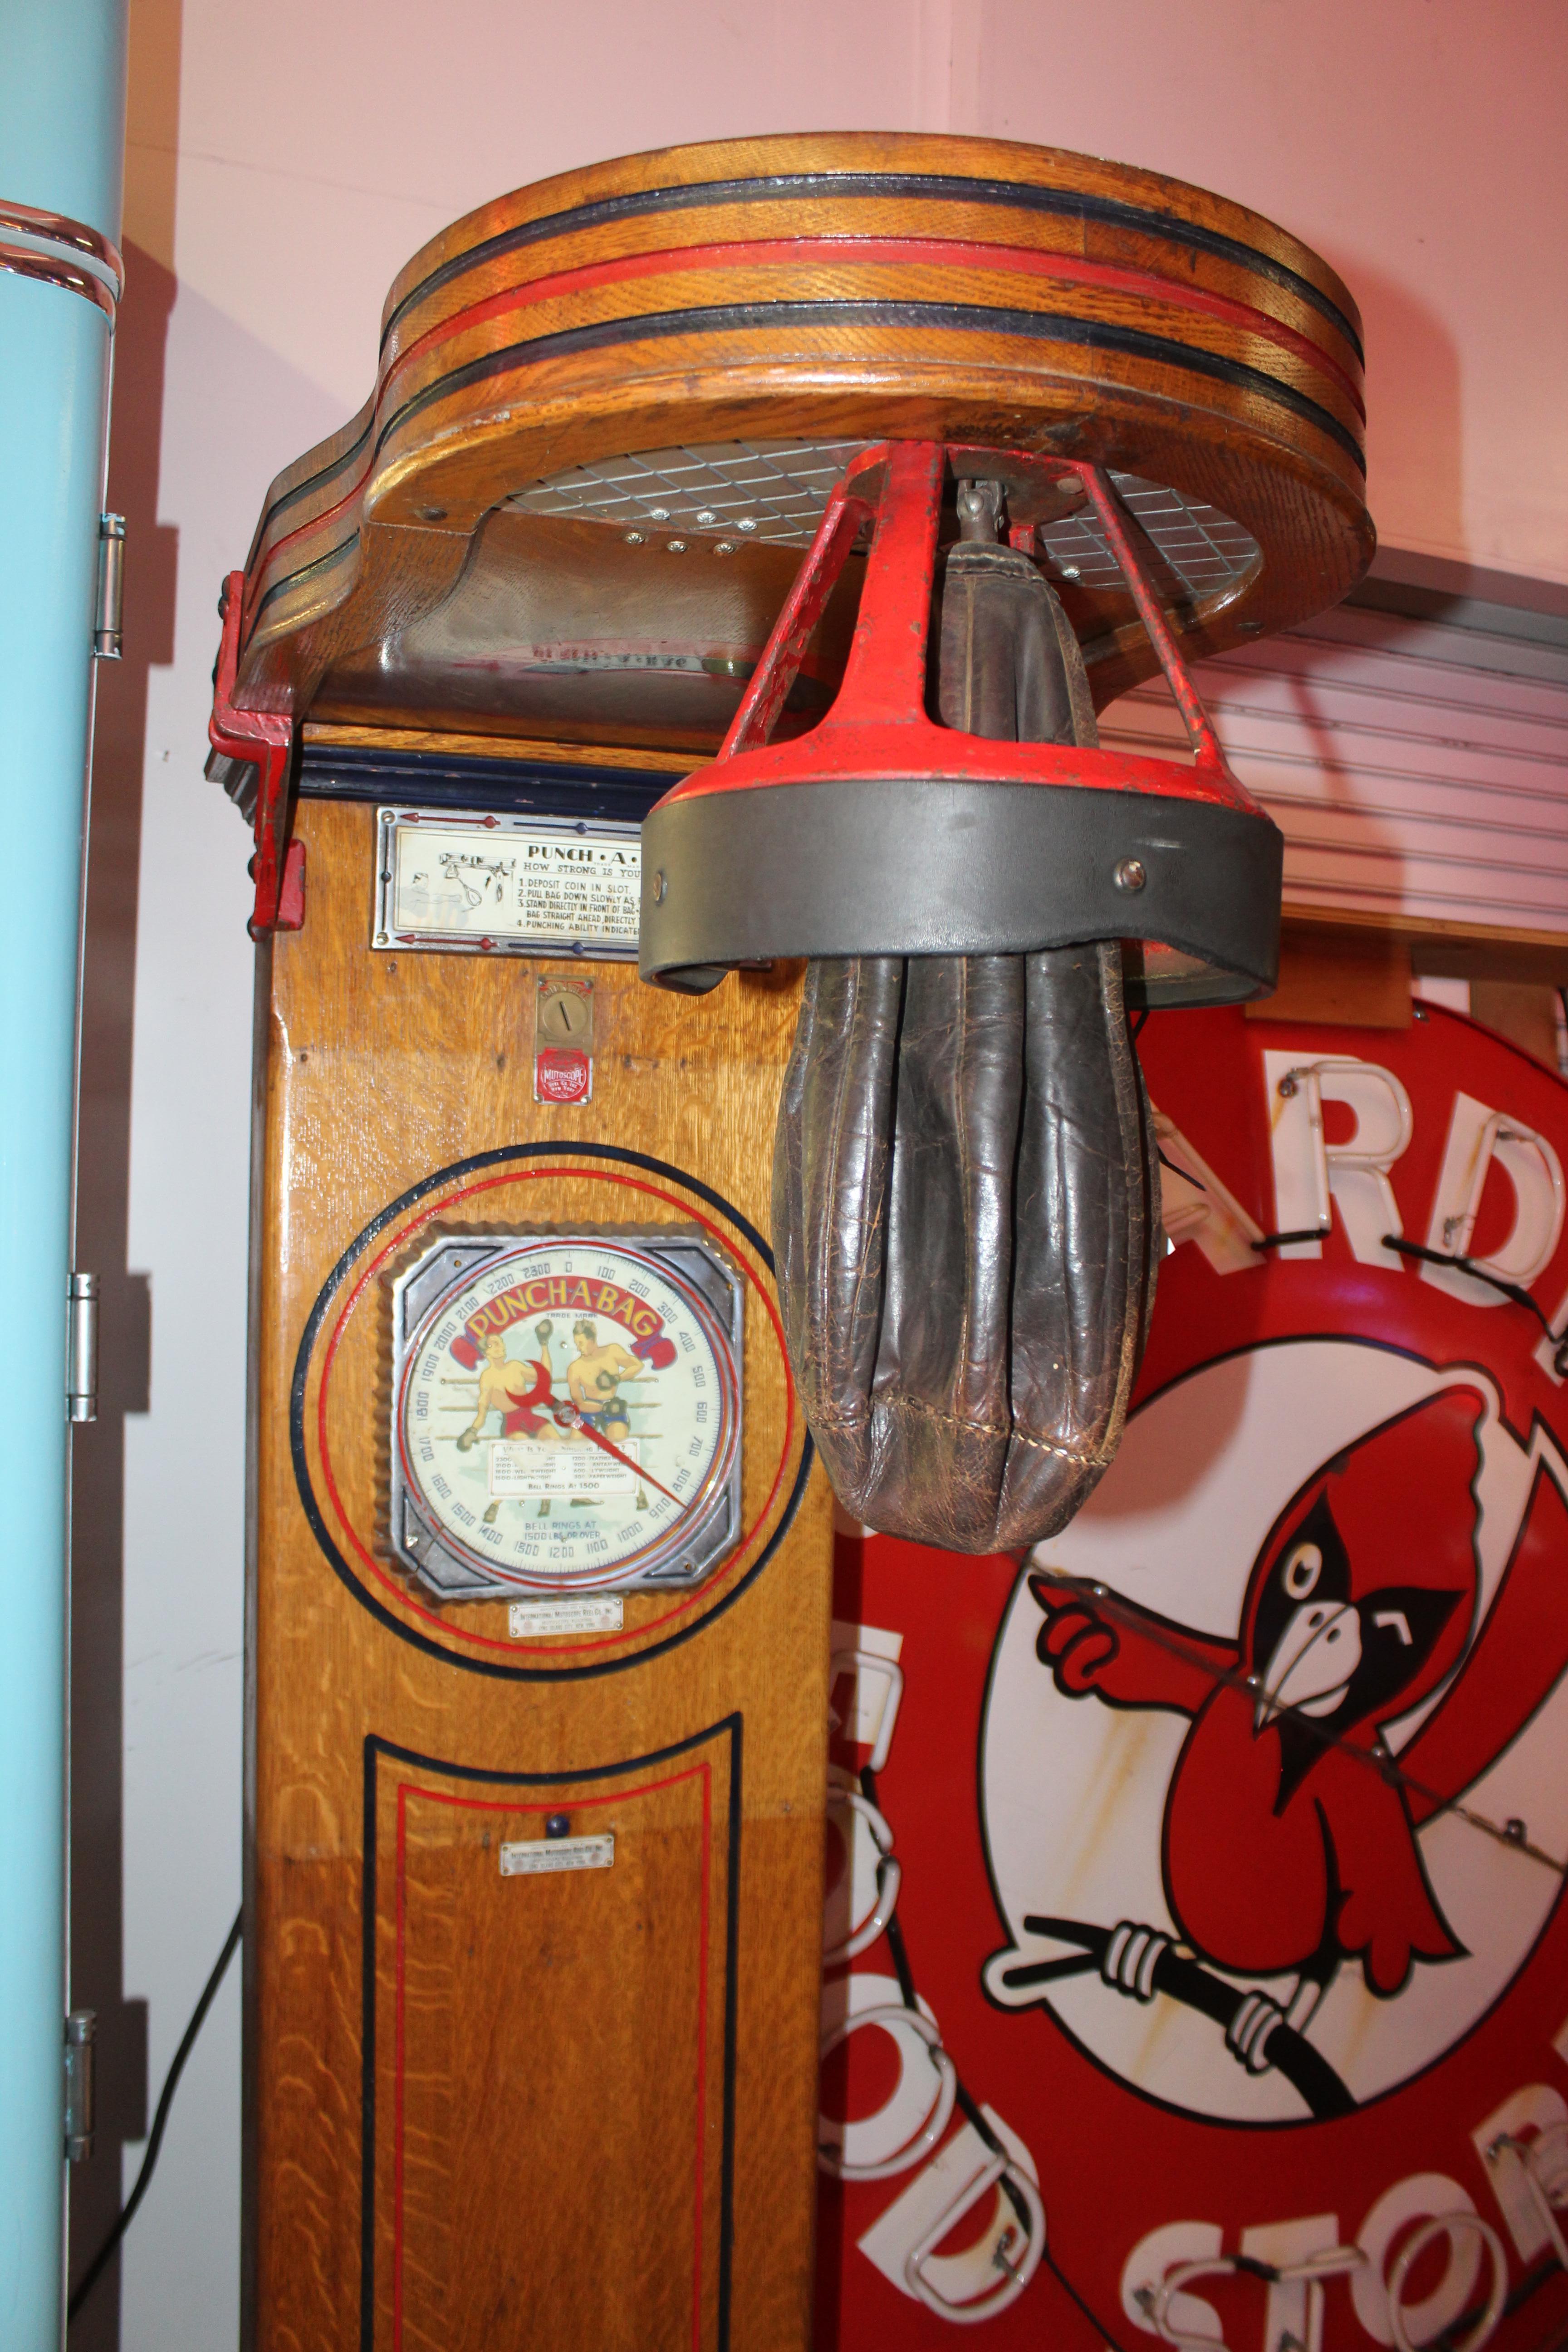 1 cent Mutoscope “Punch-A-Bag” floor punching bag game strength tester arcade machine. This is more of a decoration piece or a great restoration project. It is not a working machine. Machine has some blemishes and wear. Also has a spot that dis